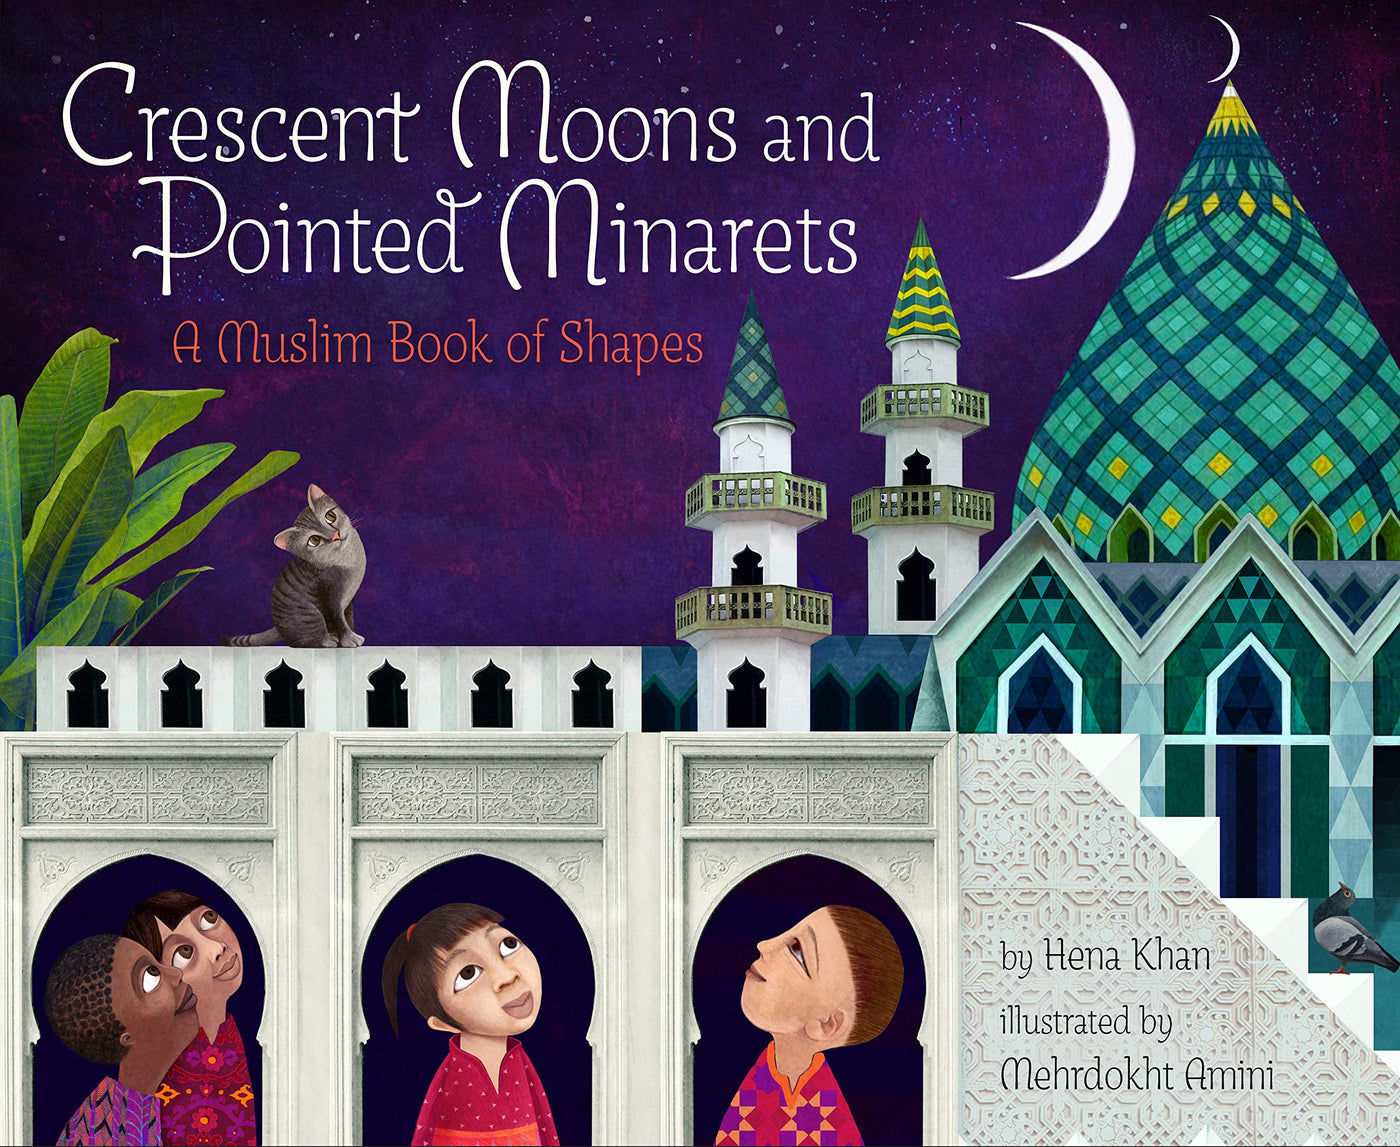 Sale Crescent Moons and Pointed Minarets: A Muslim Book of Shapes